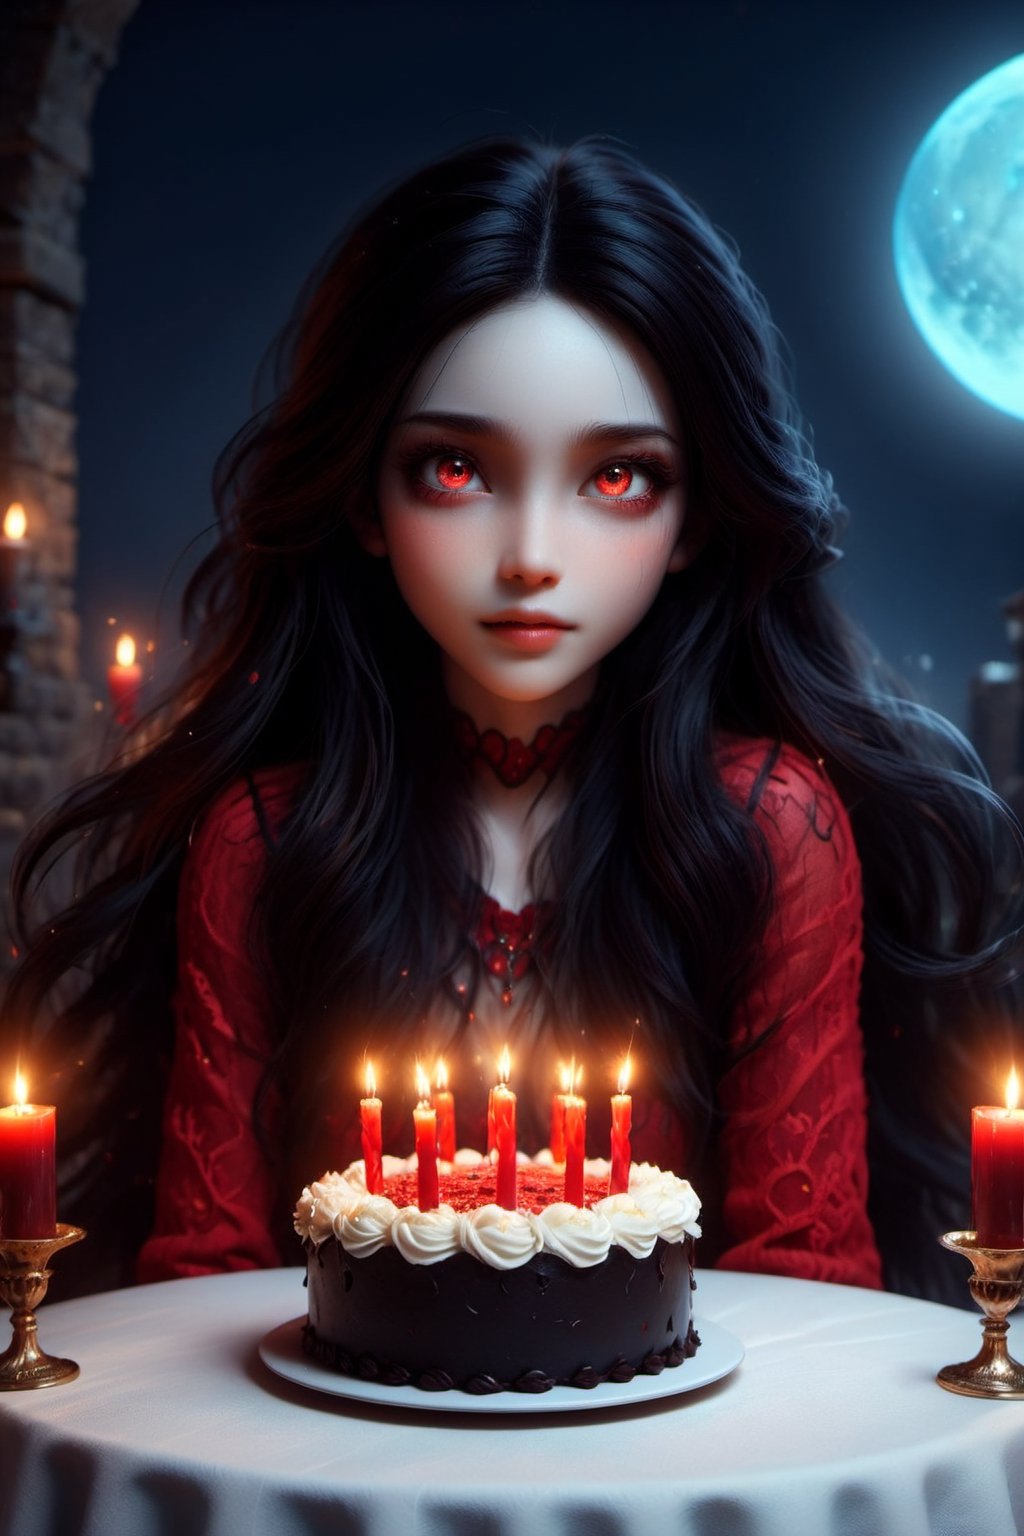 Masterpiece, best quality, ultra high res, ultra detailed, detailed face, detailed eyes, dark fantasy art, horror and dramatic, 14 years old girl, upper body, beautiful girl, cute, pale skin, long black hair, in ear hair, smile, (red big birthday cake at table), (holding a big black sign with (("DAYAT")), text logo, black, red, glowing, glow:1.3, with her hands, red glowing eyes, sitting at night castle, focus on viewer, front view, Movie Still, upper body, monster, text logo 